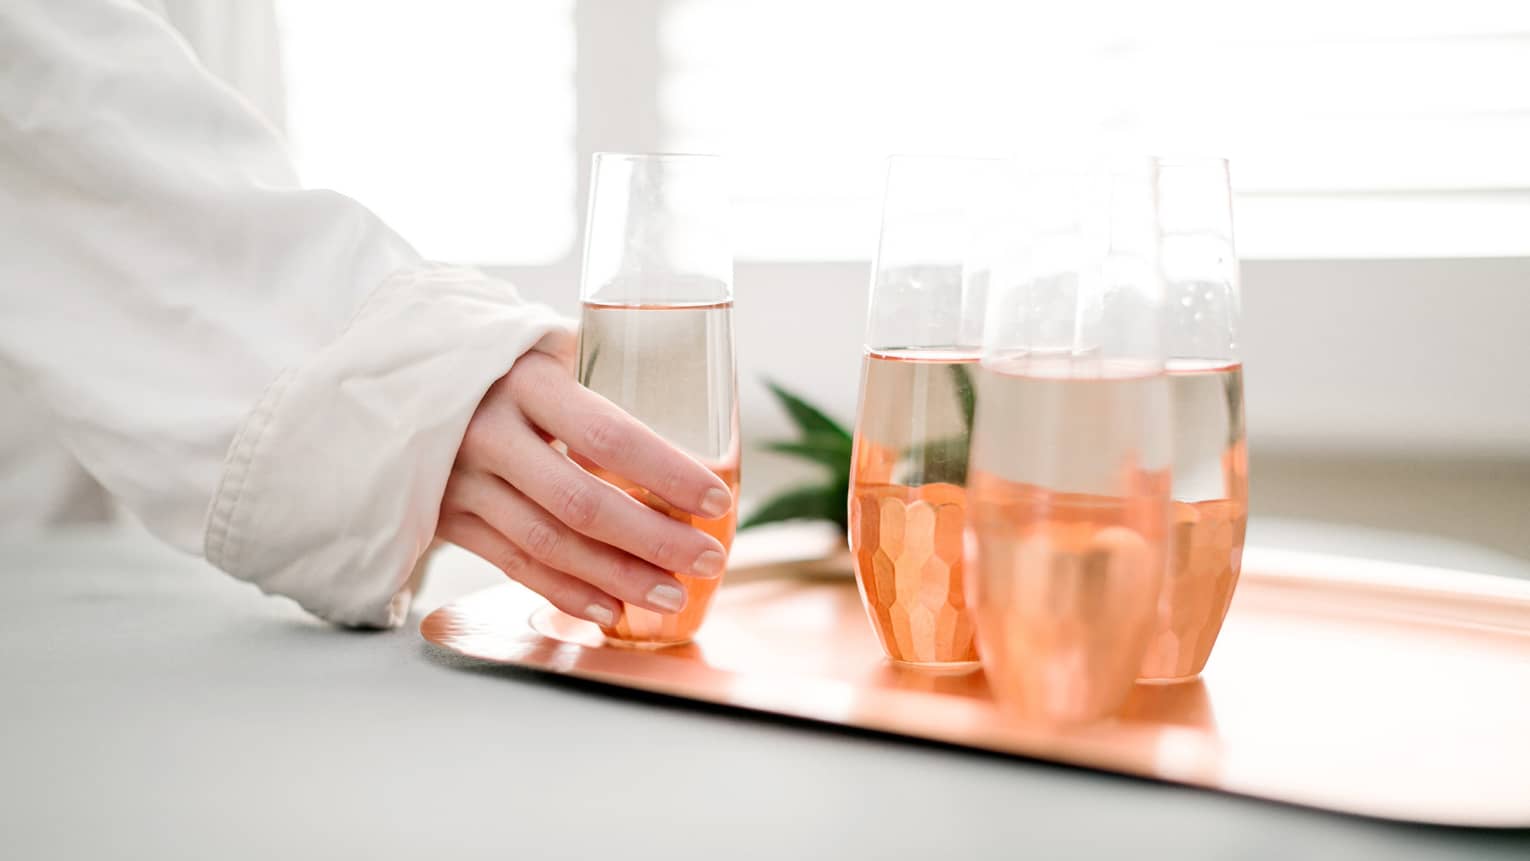 Woman in white bathrobe hand reaches for glass of water, next to three glasses on rose gold tray